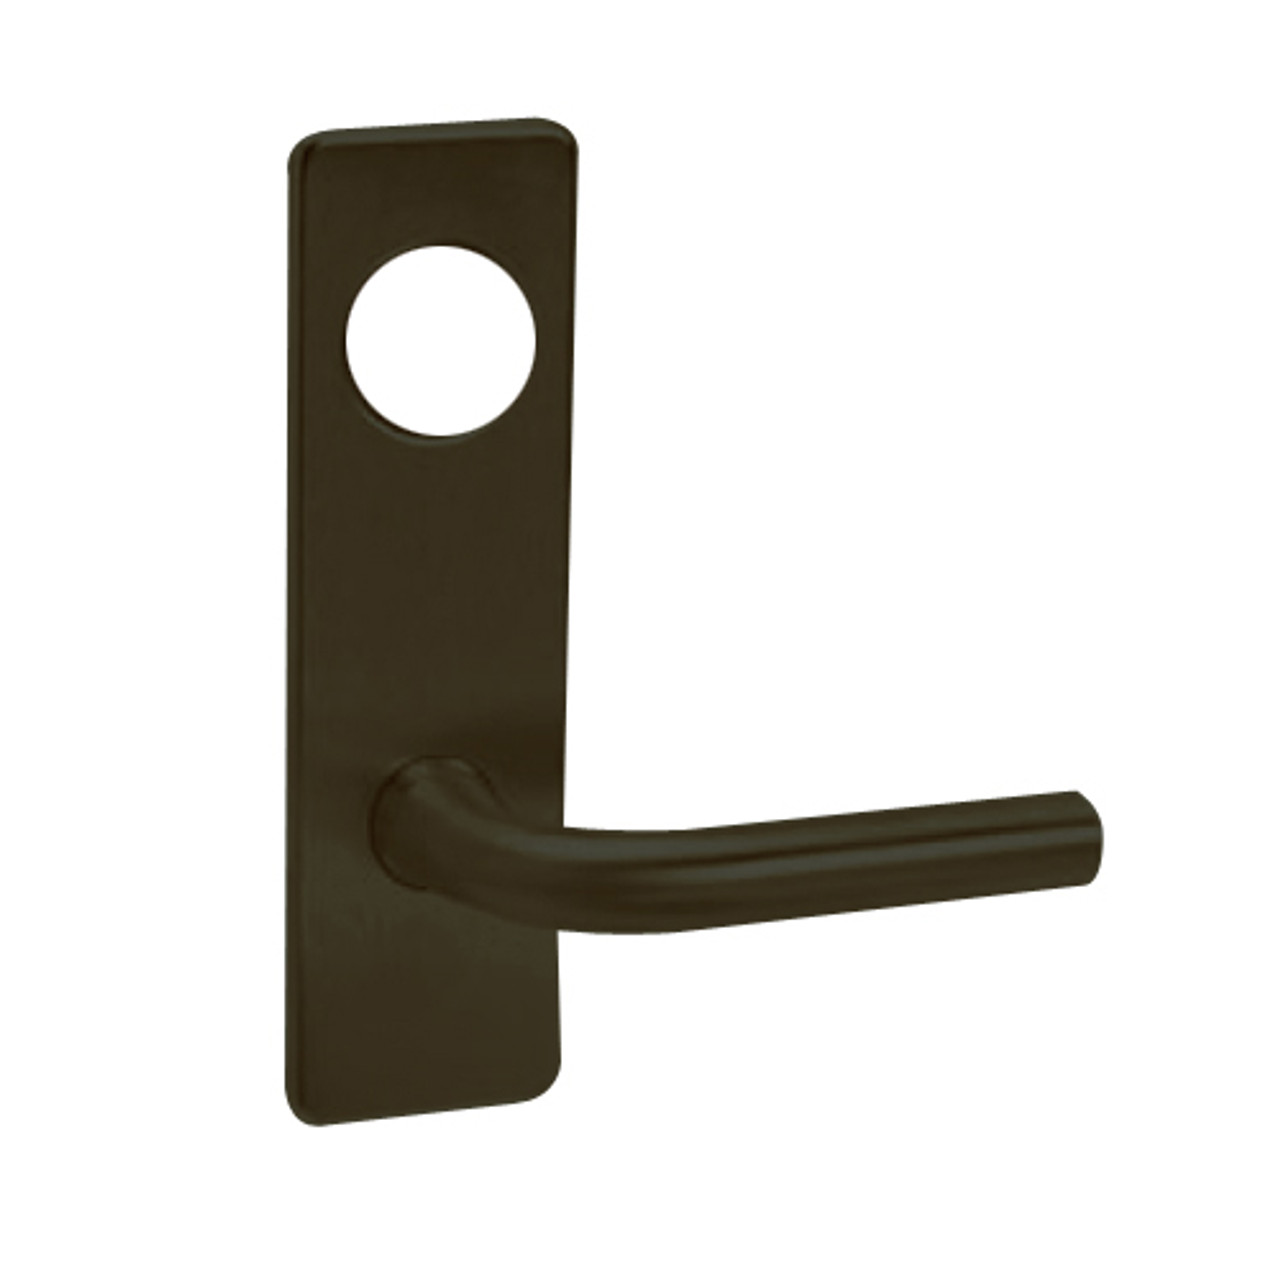 ML2024-RSR-613-CL7 Corbin Russwin ML2000 Series IC 7-Pin Less Core Mortise Entrance Locksets with Regis Lever in Oil Rubbed Bronze